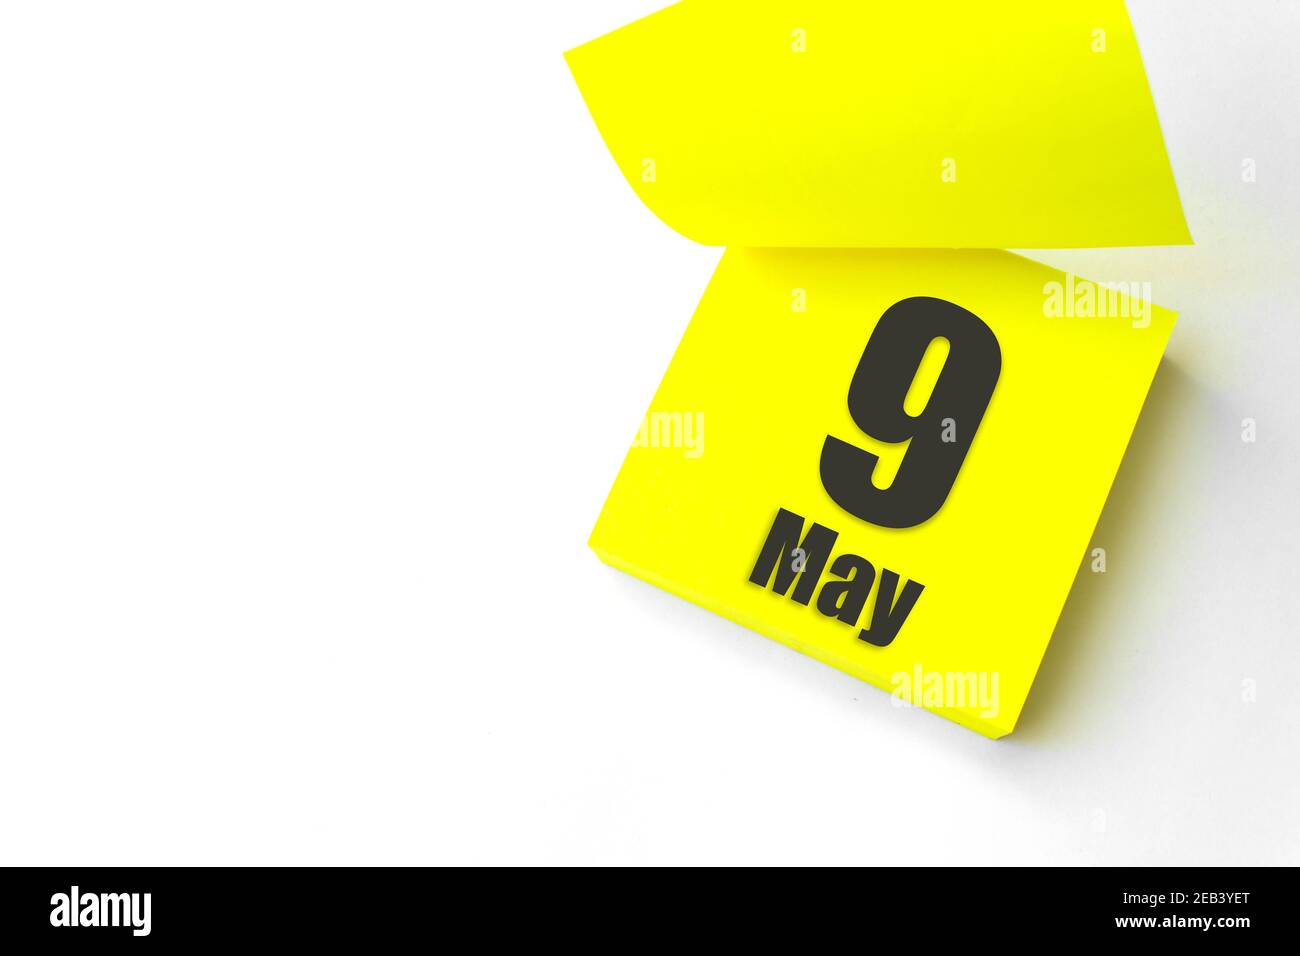 May 9th. Day 9 of month, Calendar date. Close-Up Blank Yellow paper reminder sticky note on White Background. Spring month, day of the year concept Stock Photo